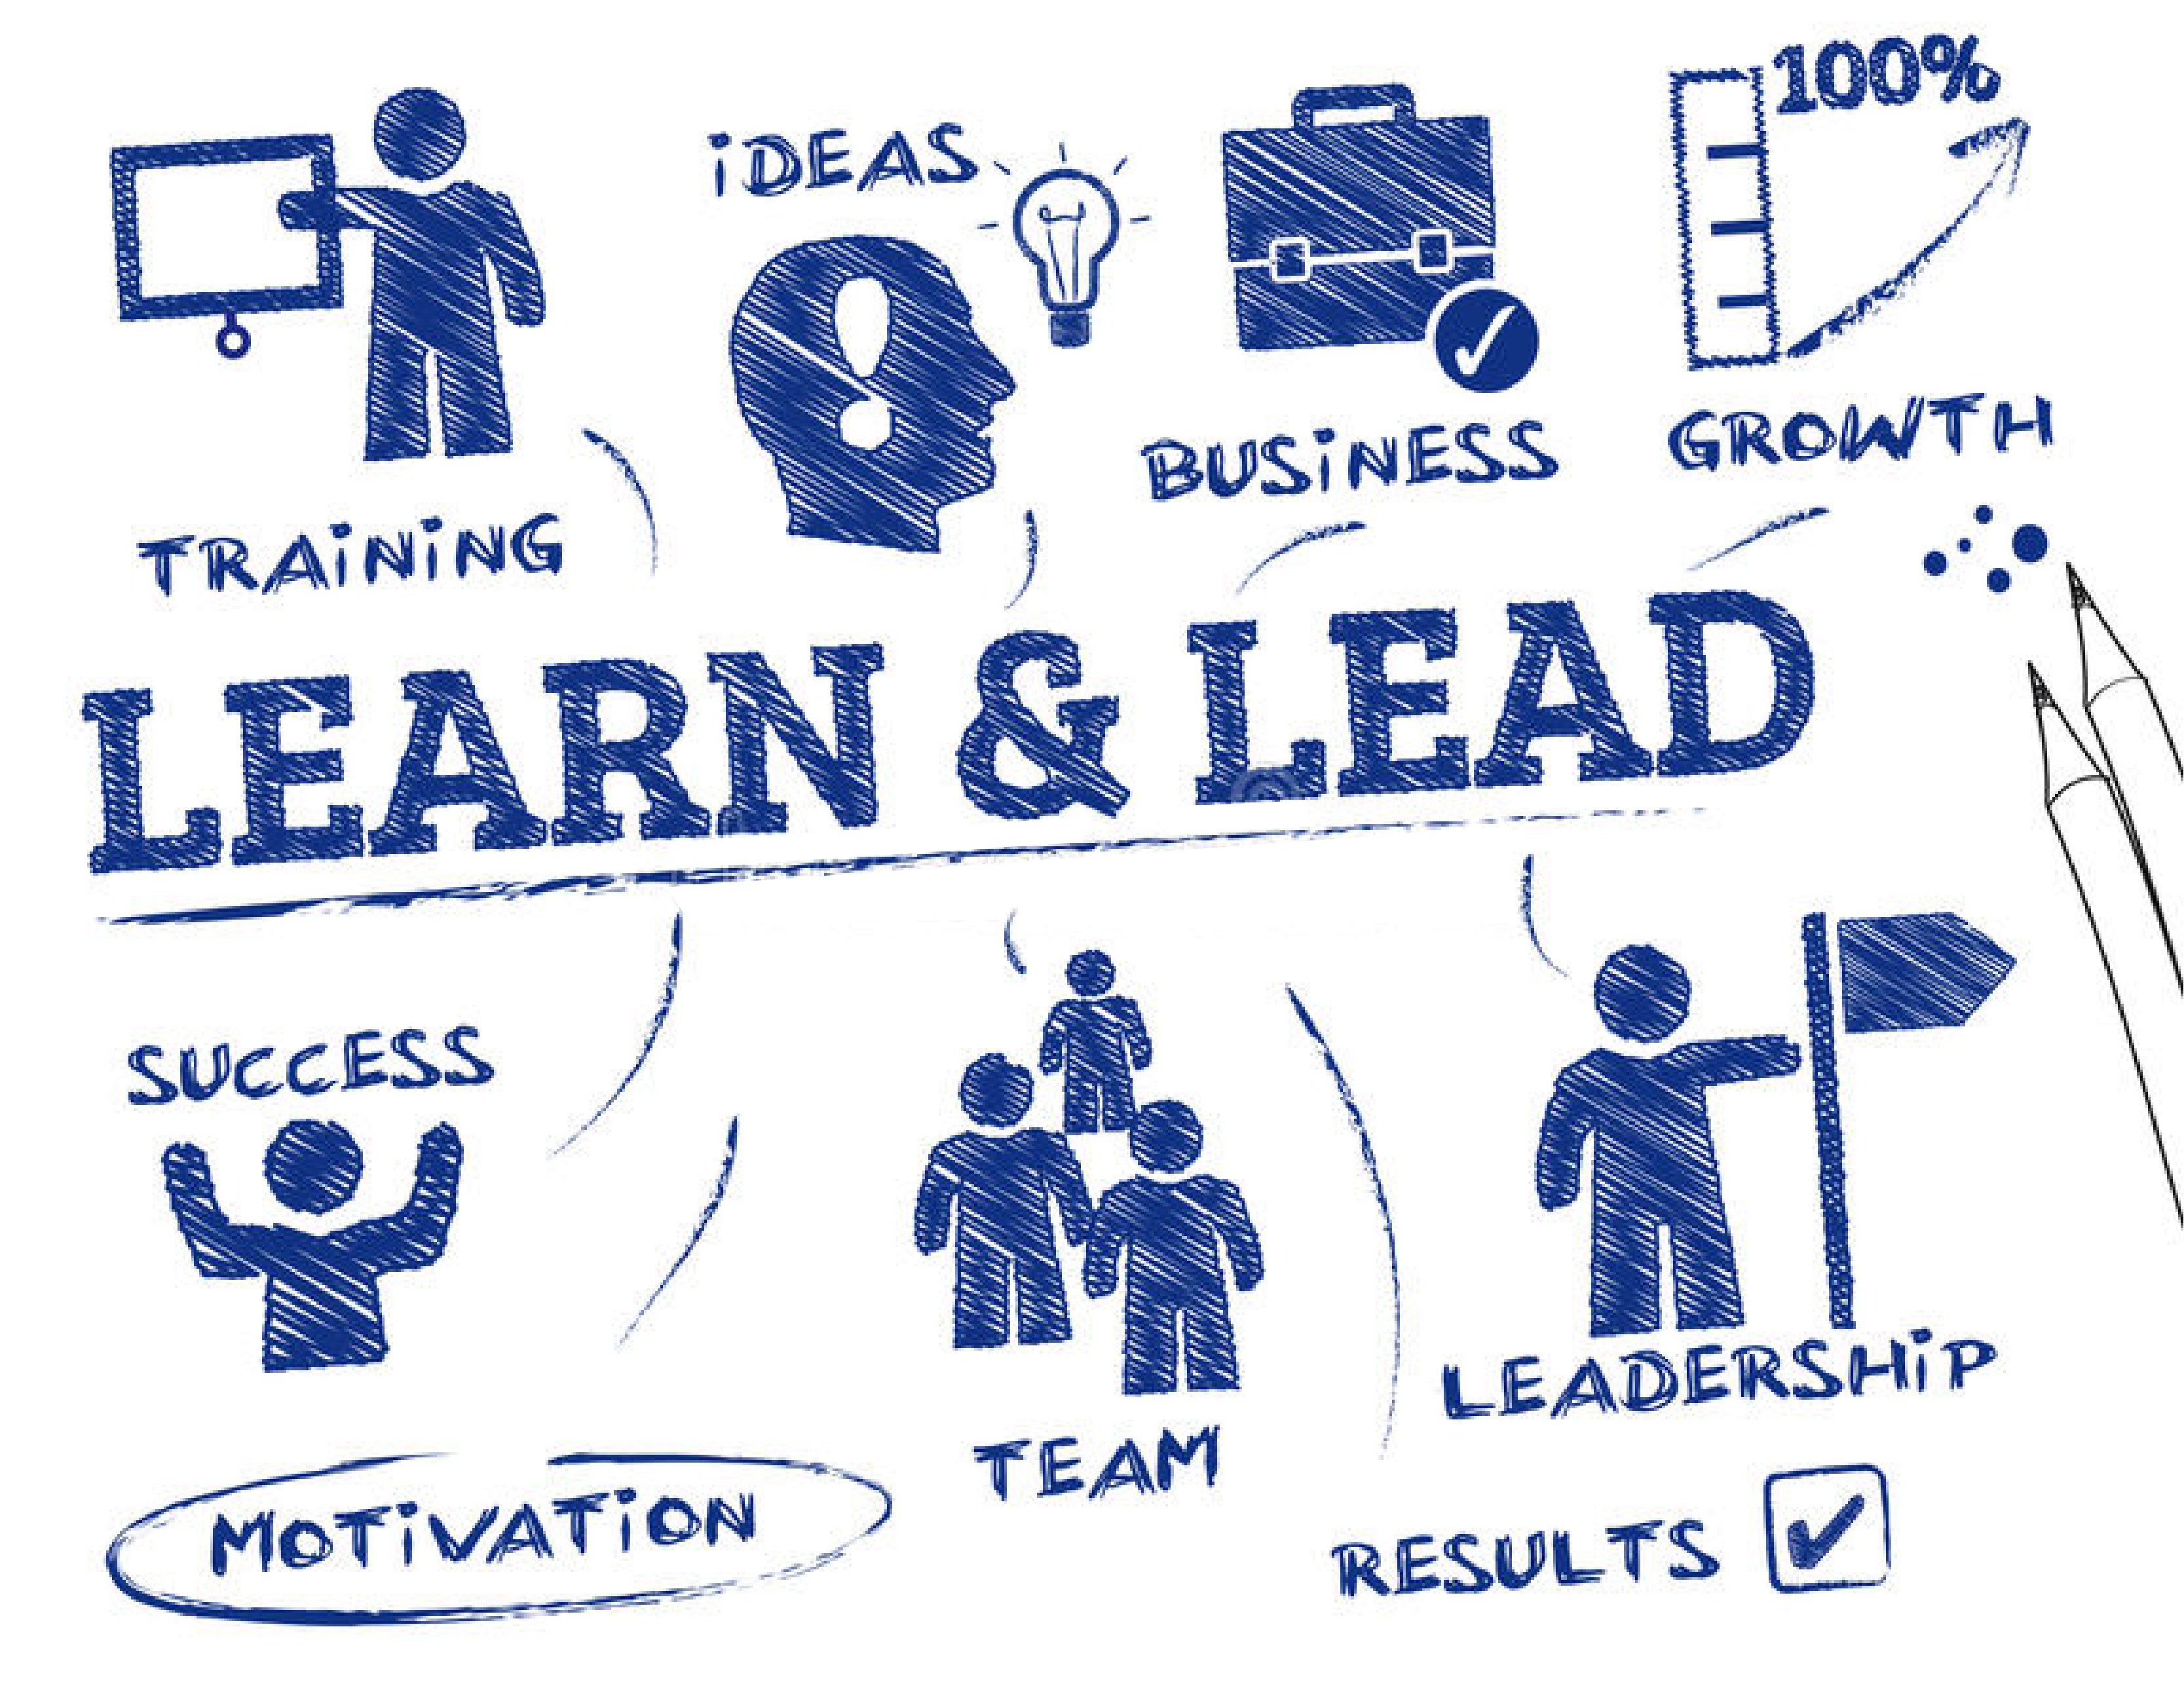 "Learn & Lead" surrounded by words with connected images: "Training" with a figure and a presentation board, "Ideas" with a head silhouette & a lightbulb, "Business" with a briefcase, "Growth" with a line graph, "Motivation" with a figure holding up "Success", "Team" with three figures, "Results" with a checkbox, and "Leadership" with a figure holding a flag.